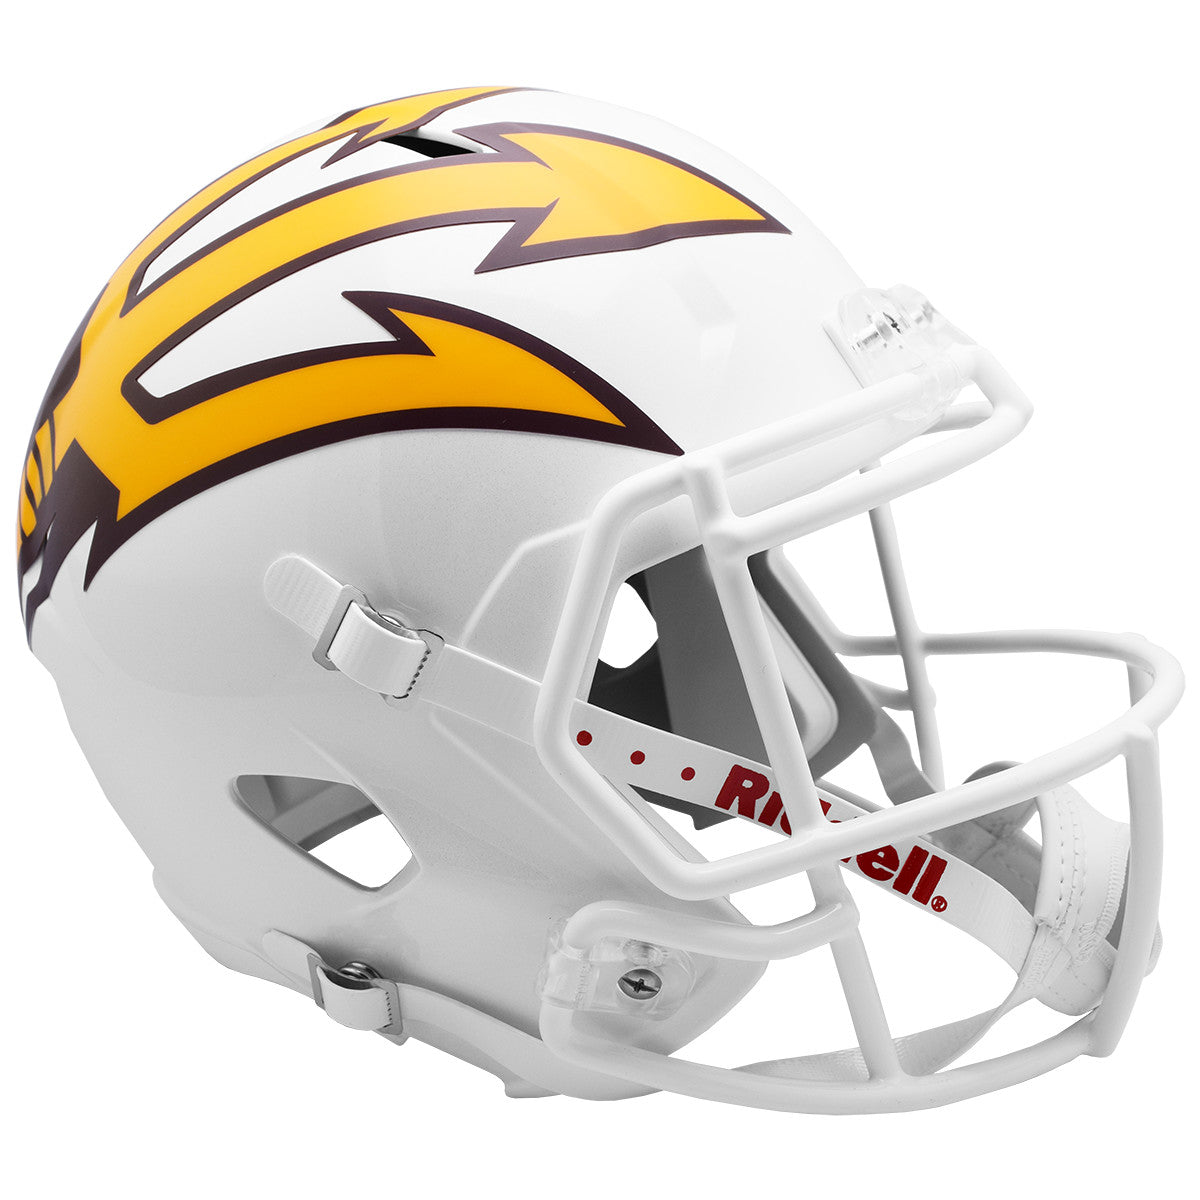 ASU replica football helmet in white with gold pitchfork on the right side